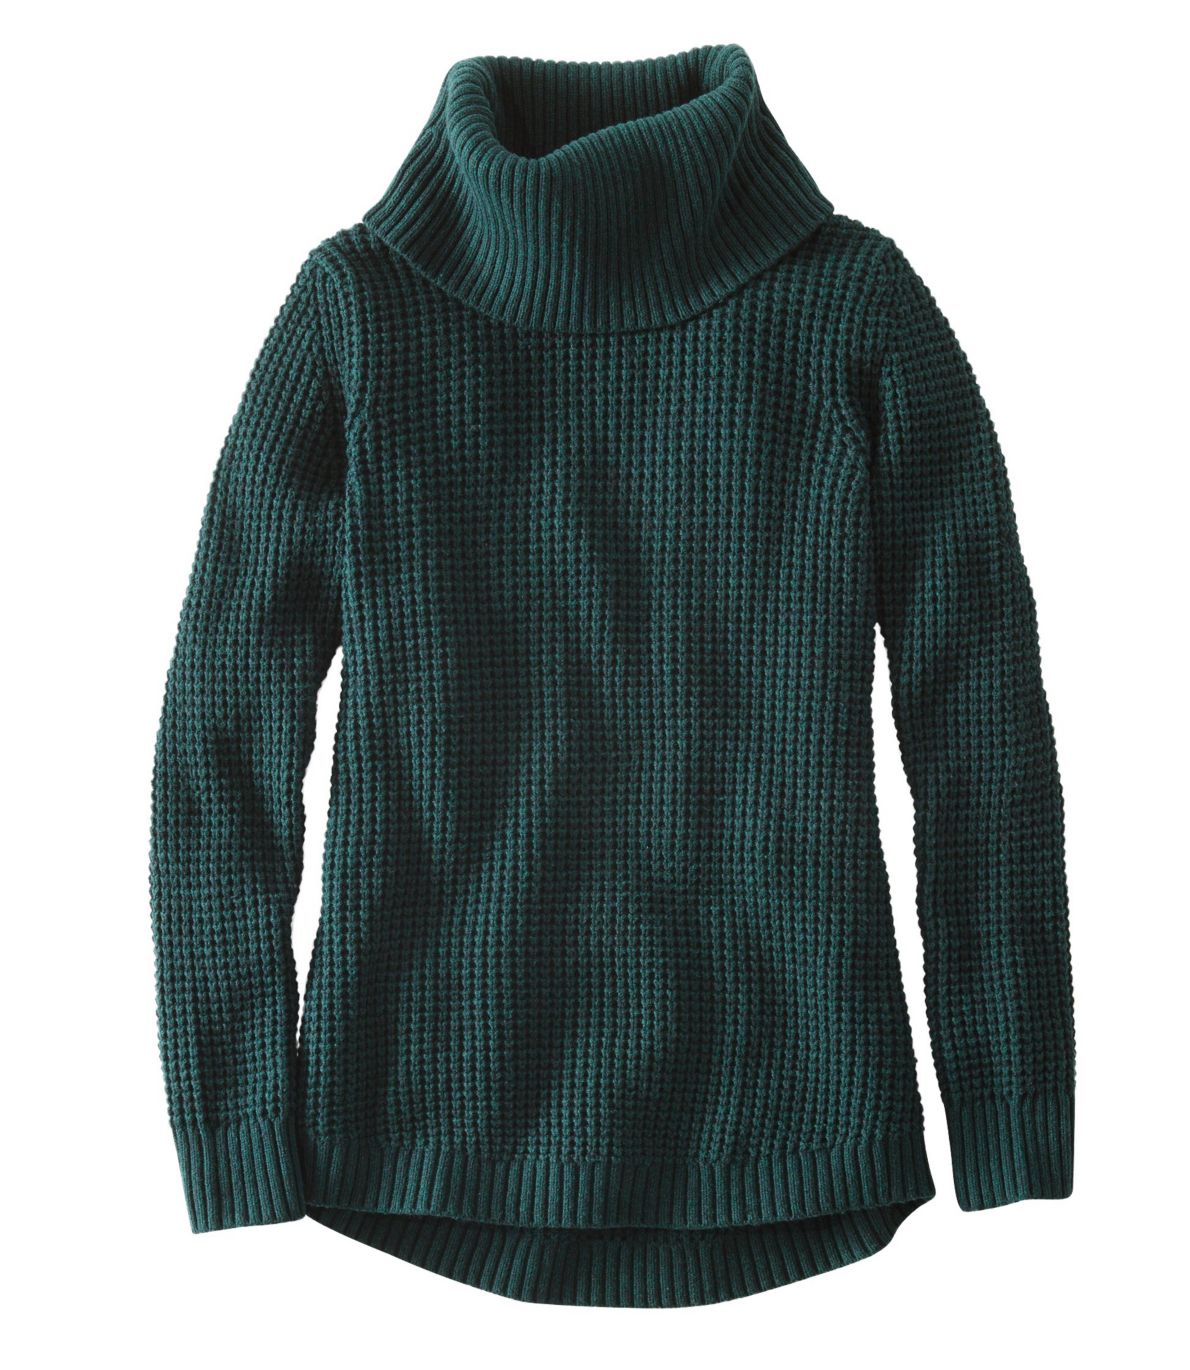 Waffle-Stitch Sweater, Cowlneck Pullover